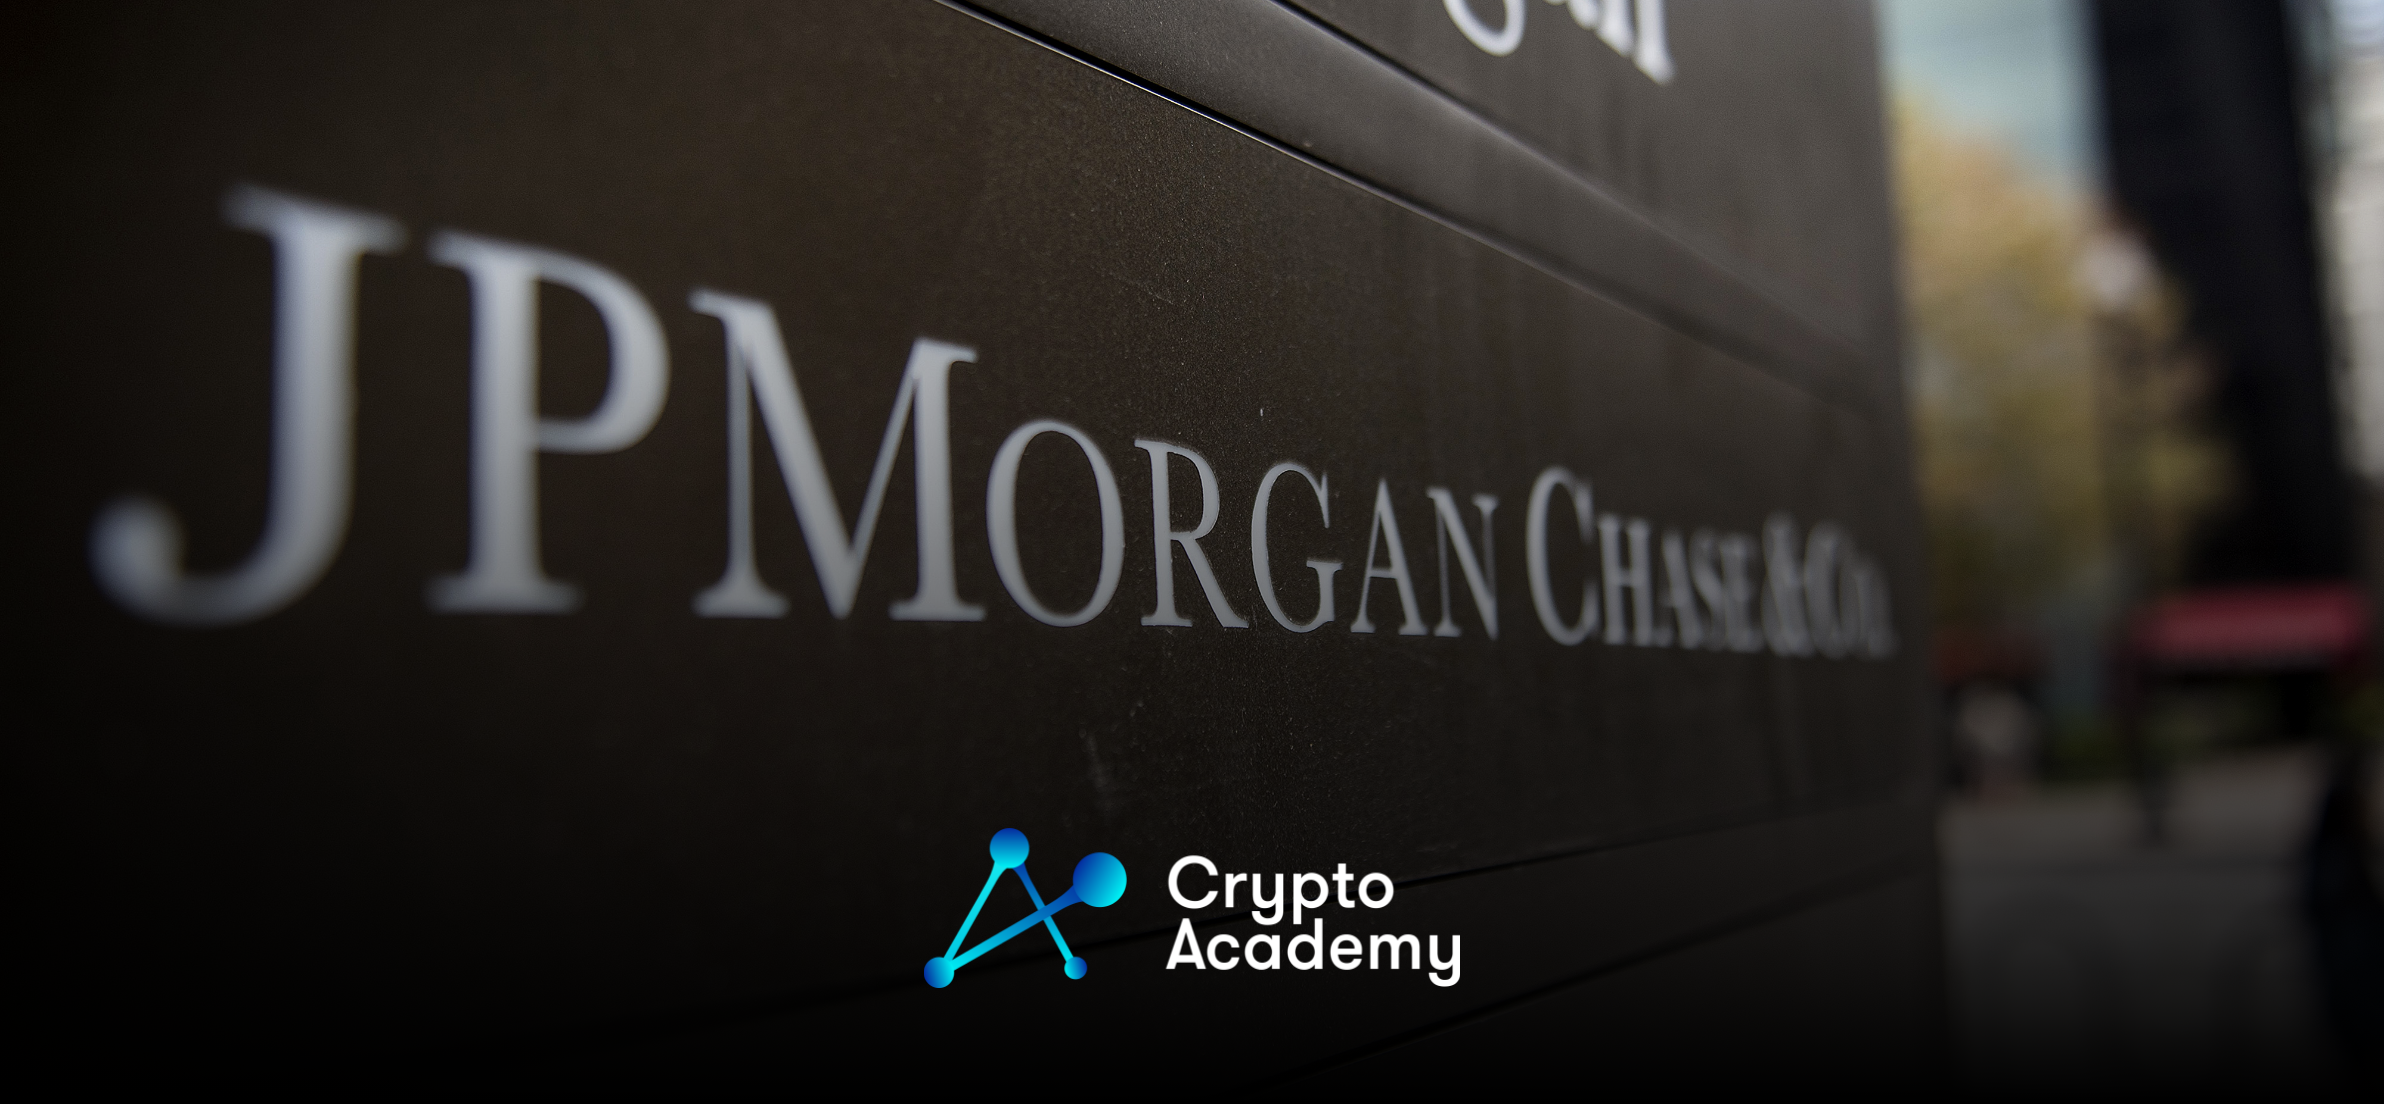 Ethereum’s Post-Shanghai Upgrade Activity Disappoints, JPMorgan Analysts Report